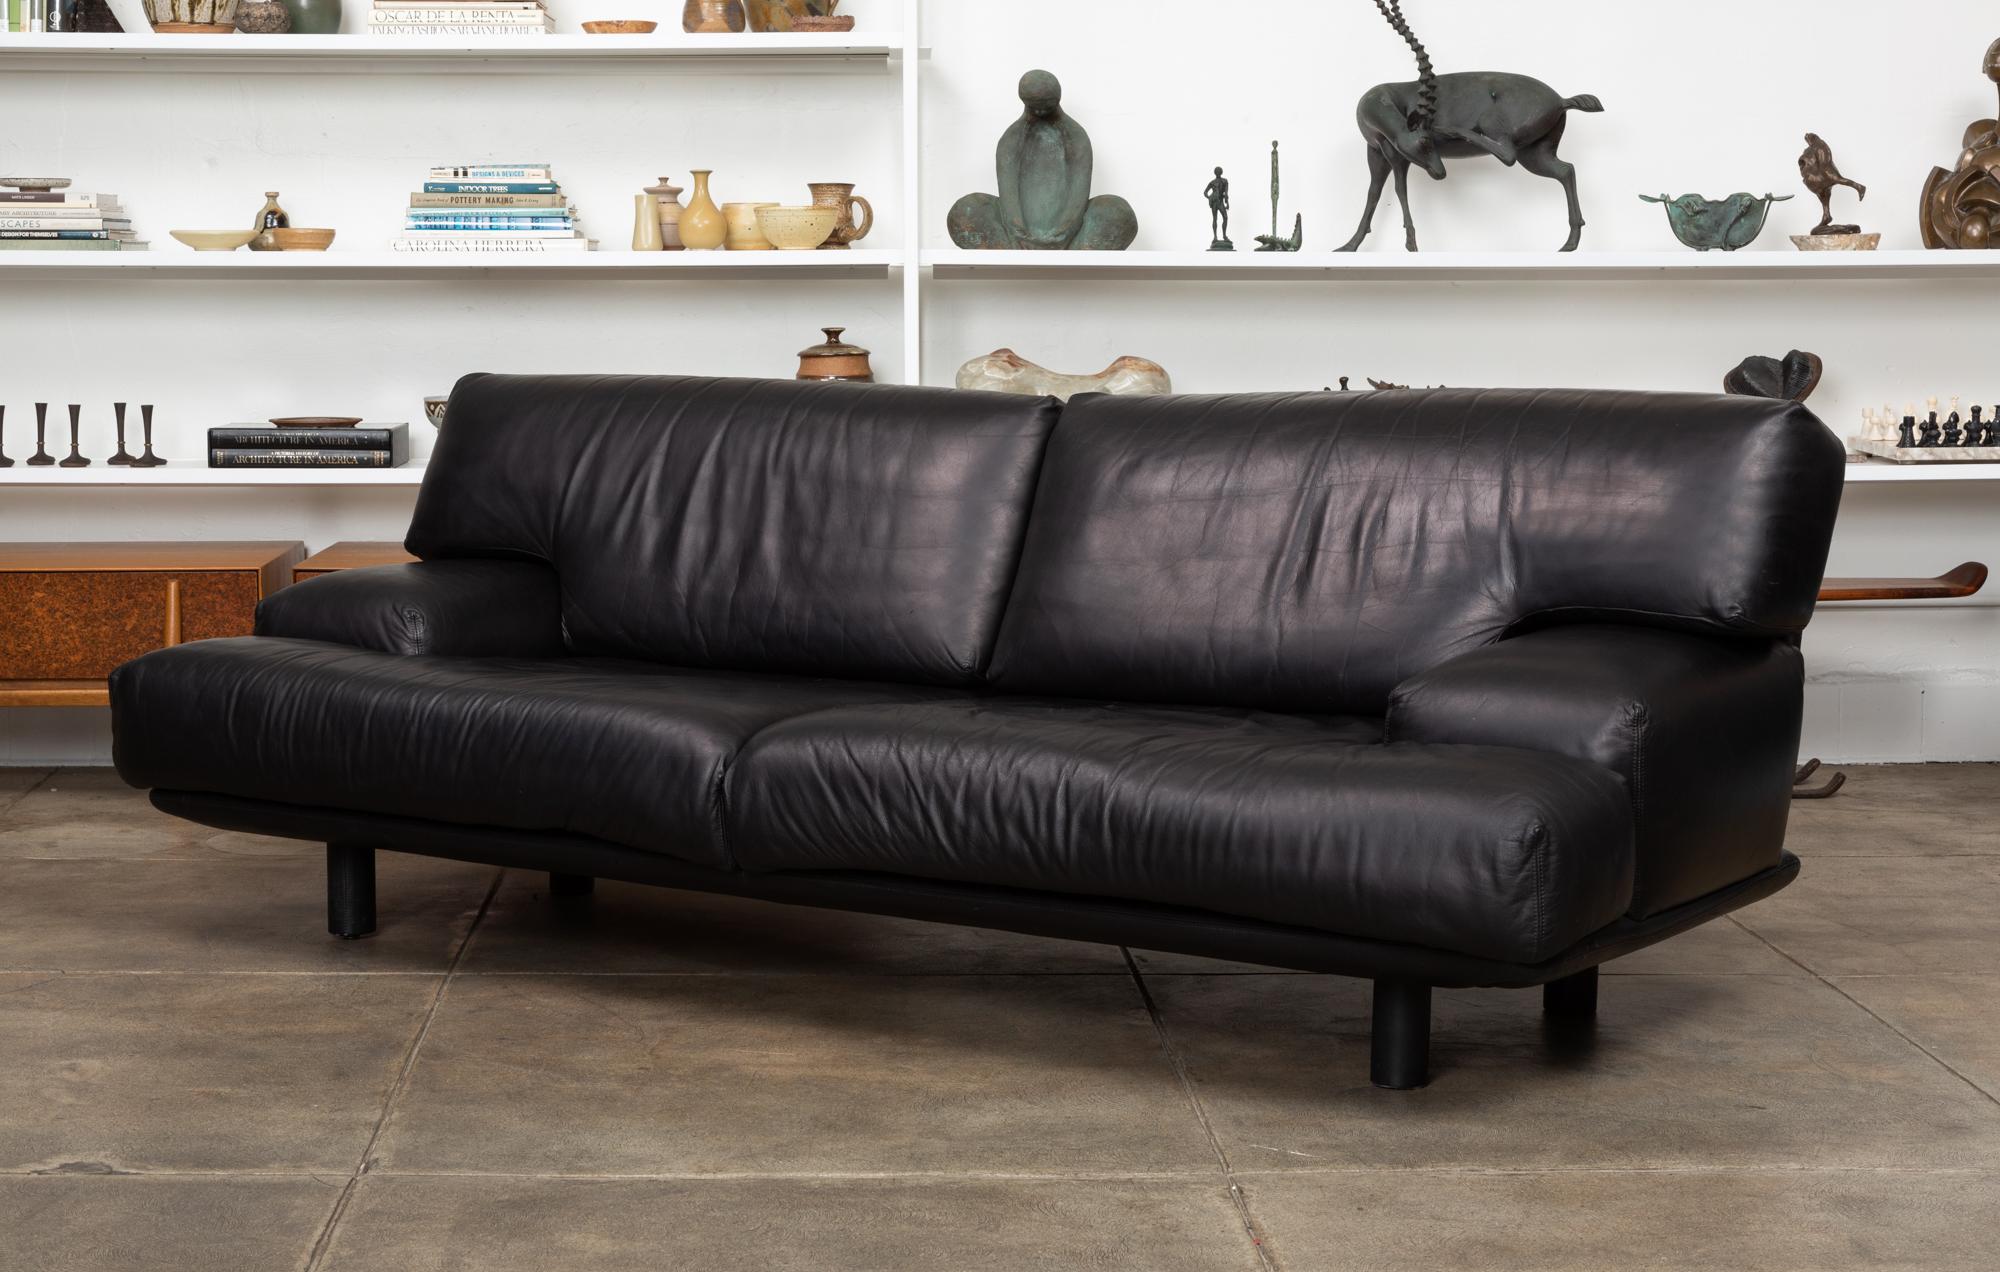 Black leather sofa by Brayton International, USA, circa 1980s. The sofa features a Minimalist low profile with wide sumptuous cushions and armrests, all upholstered in a soft black leather. The cushions sit atop an upholstered leather frame with